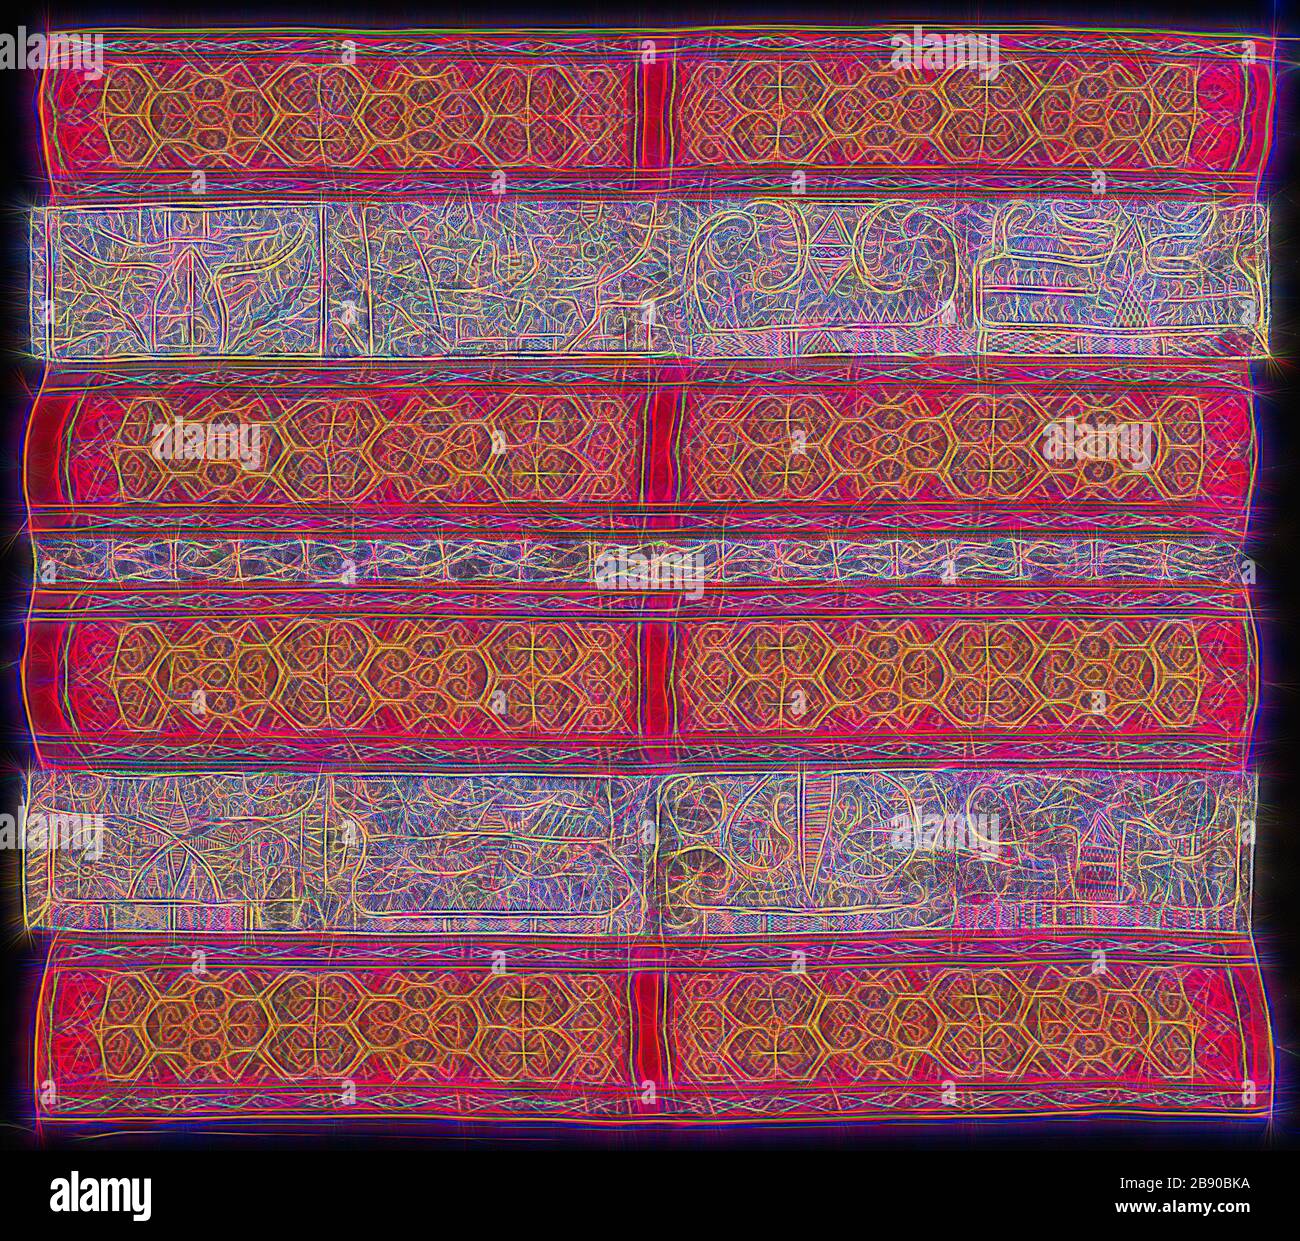 Woman’s Ceremonial Skirt (tapis), 18th century (?), Paminggir people, Indonesia, South Sumatra, Lampung area, Indonesia, Five panels joined: three panels of stripes of silk and cotton, warp resist dyed (warp ikat) plain weave (paired warps), stripes of warp-faced, weft ribbed plain weave with supplementary brocading wefts and one stripe of cotton, plain weave, embroidered with silk in back, double running, stem and surface satin stitches and two panels of cotton, plain weave, embroidered with silk in back, stem and surface satin stitches, 138.6 x 121.8 cm (54 1/2 x 47 7/8 in.), Reimagined by G Stock Photo